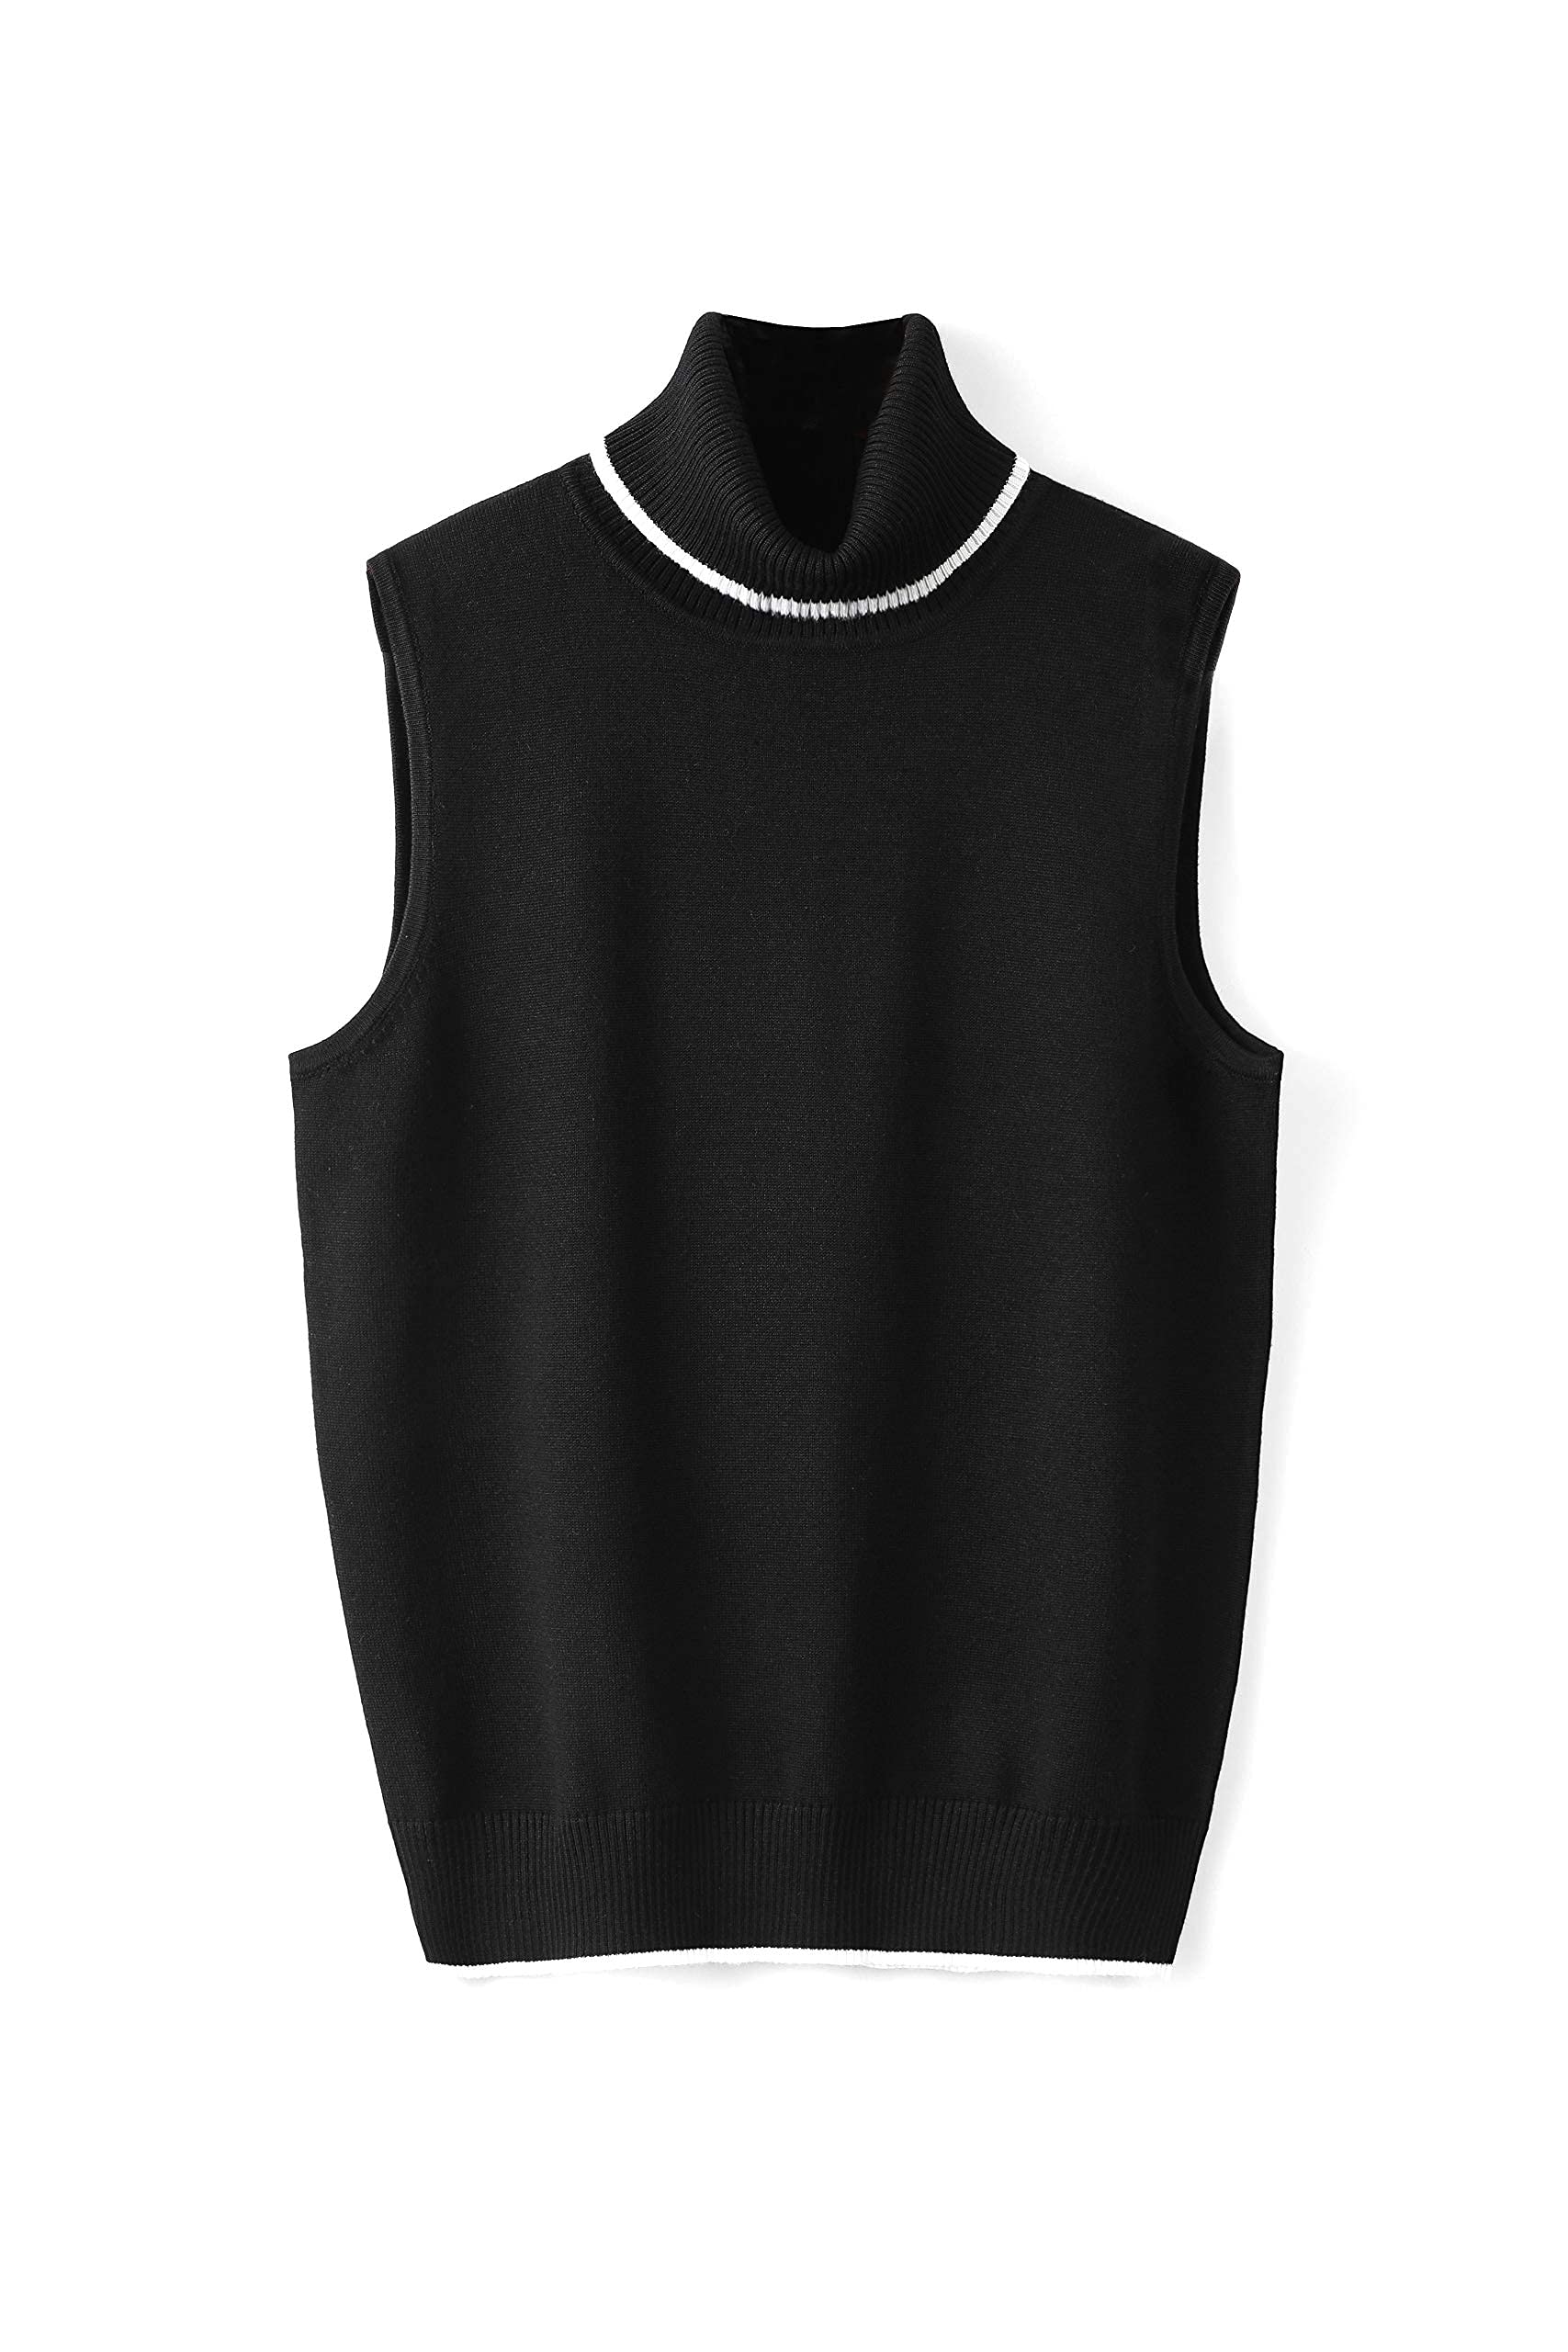 Women Sweater Pullover Stretchable Turtleneck Knit Sleeveless Slim Fit Tank Top